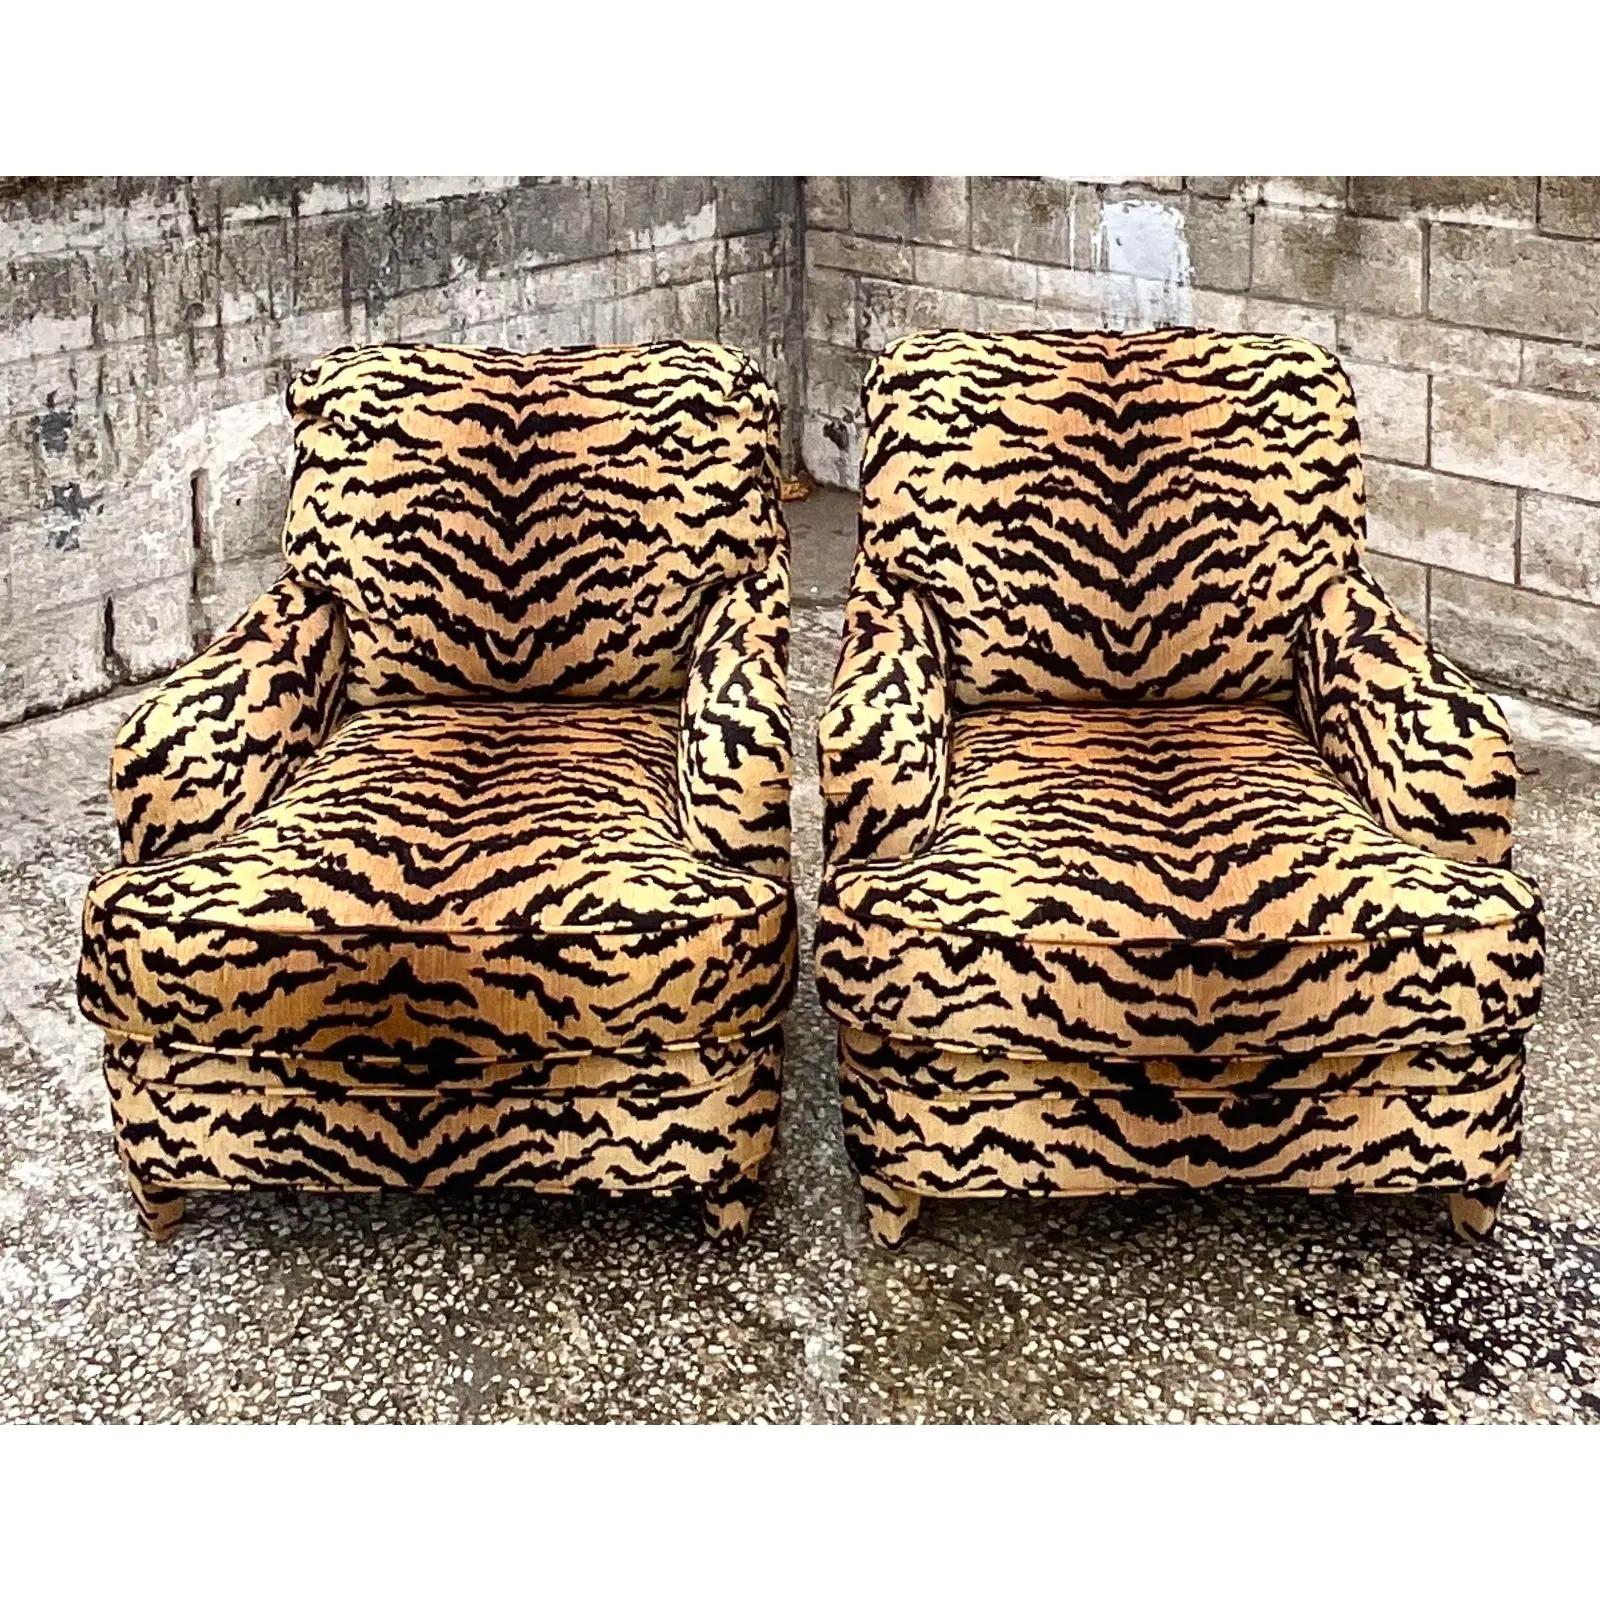 Incredible pair of vintage custom built club chairs. Gorgeous tiger stripe design in silk Devore. Deep and roomy for serious relaxing. Acquired from a Palm Beach estate.